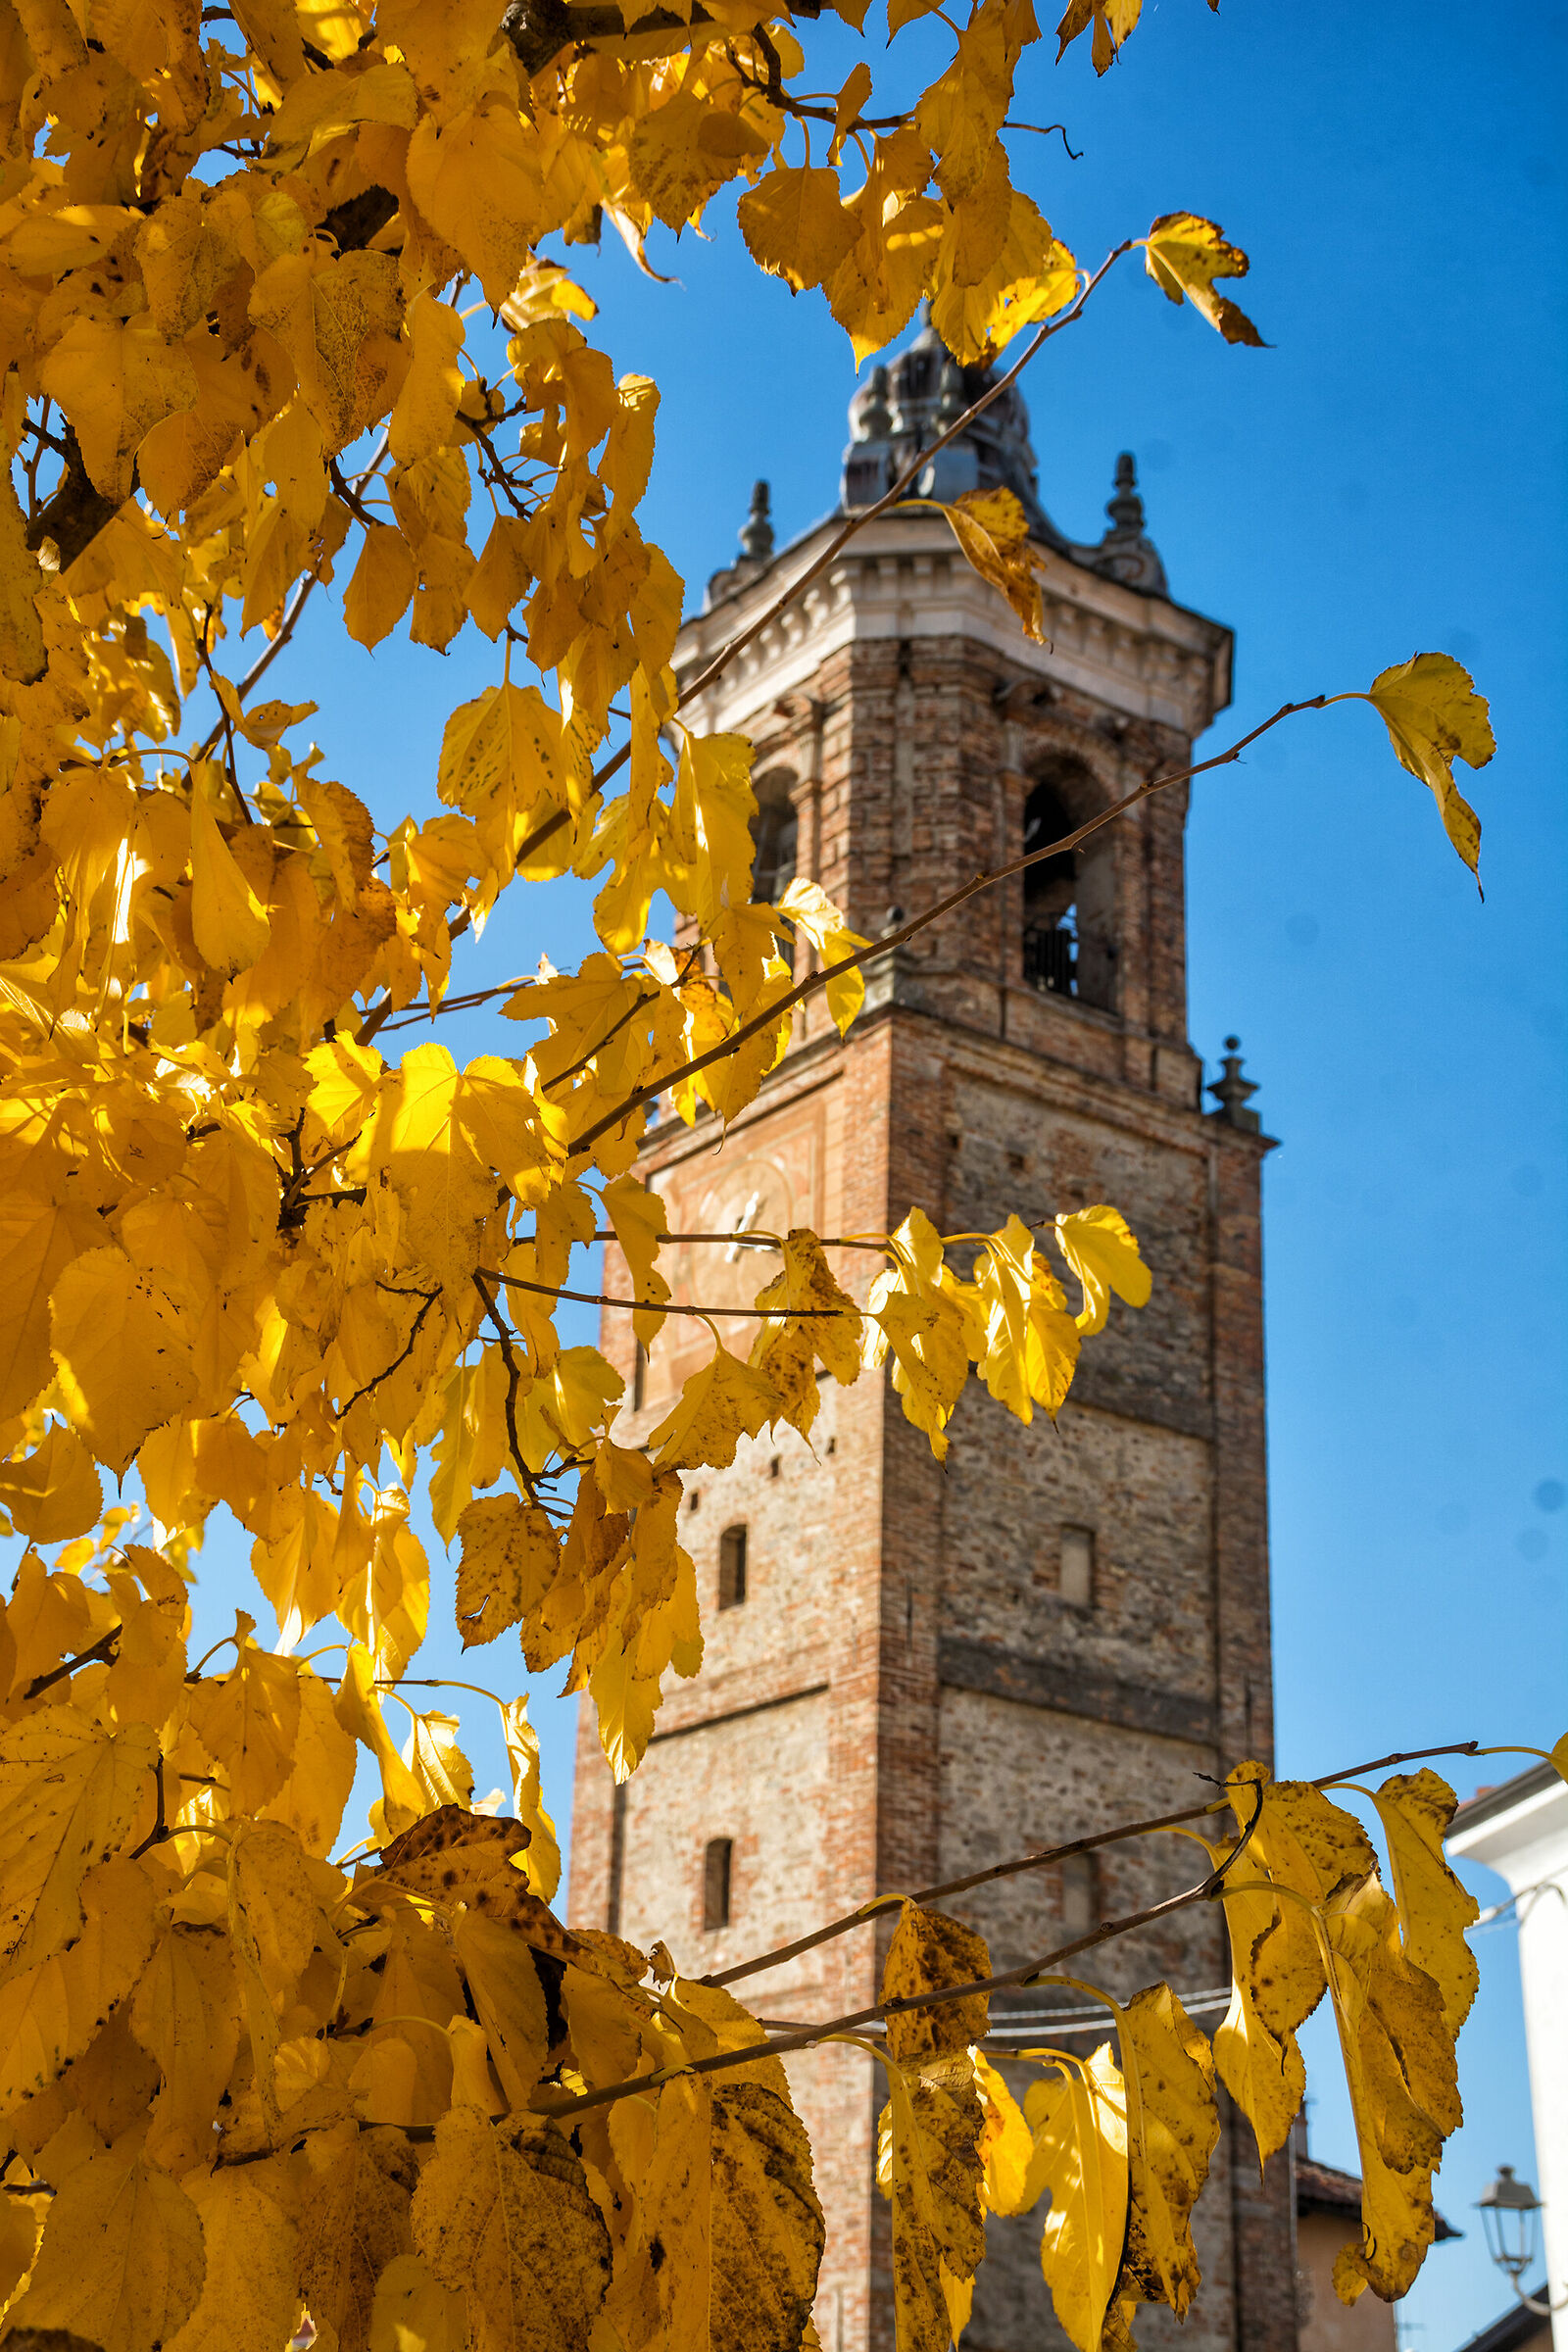 The bell tower in yellow...